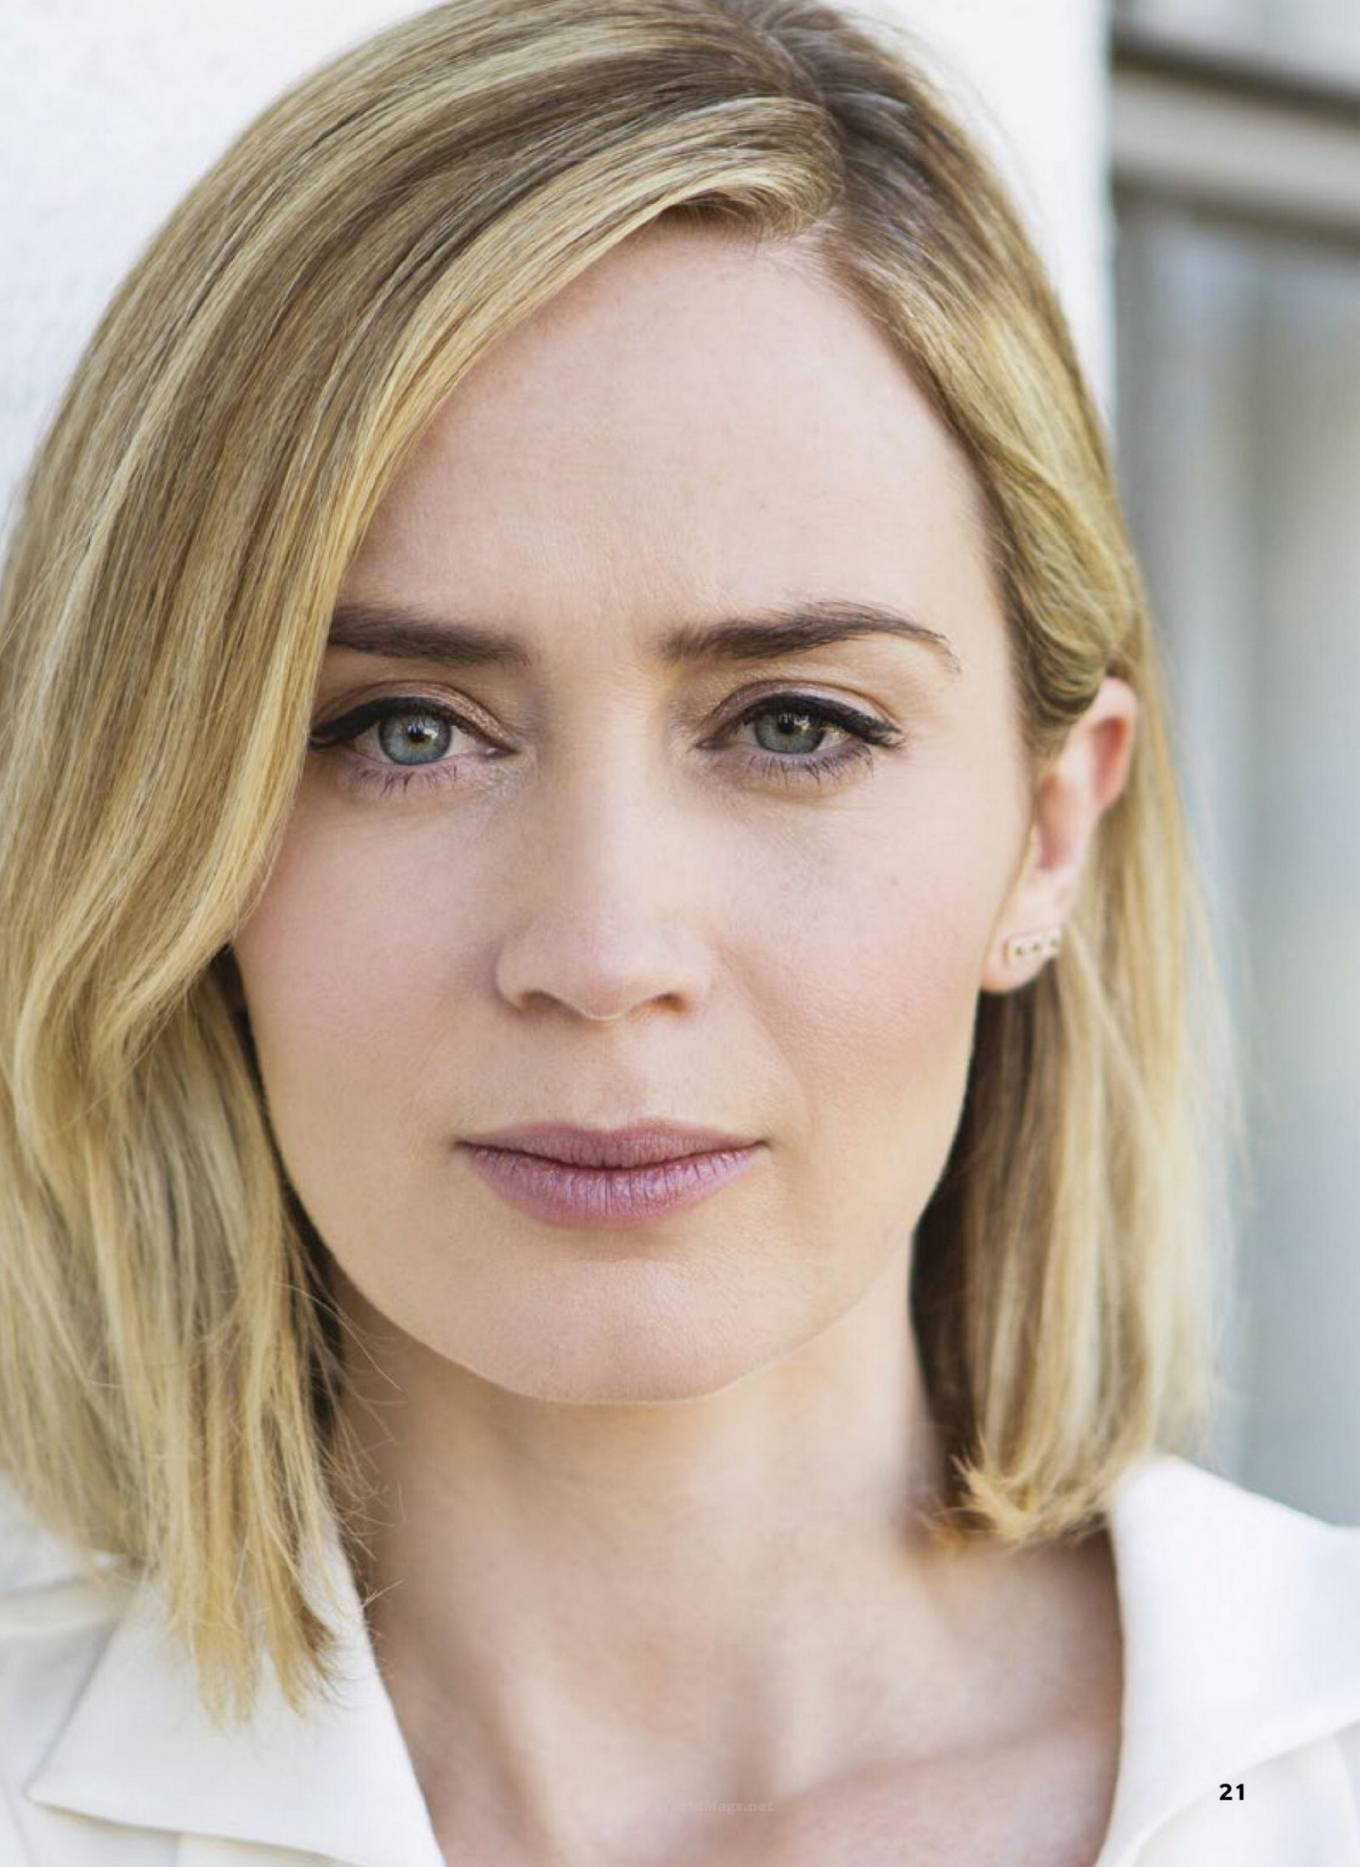 Emily Blunt â€“ Readerâ€™s Digest Magazine (UK â€“ May 2020 issue)